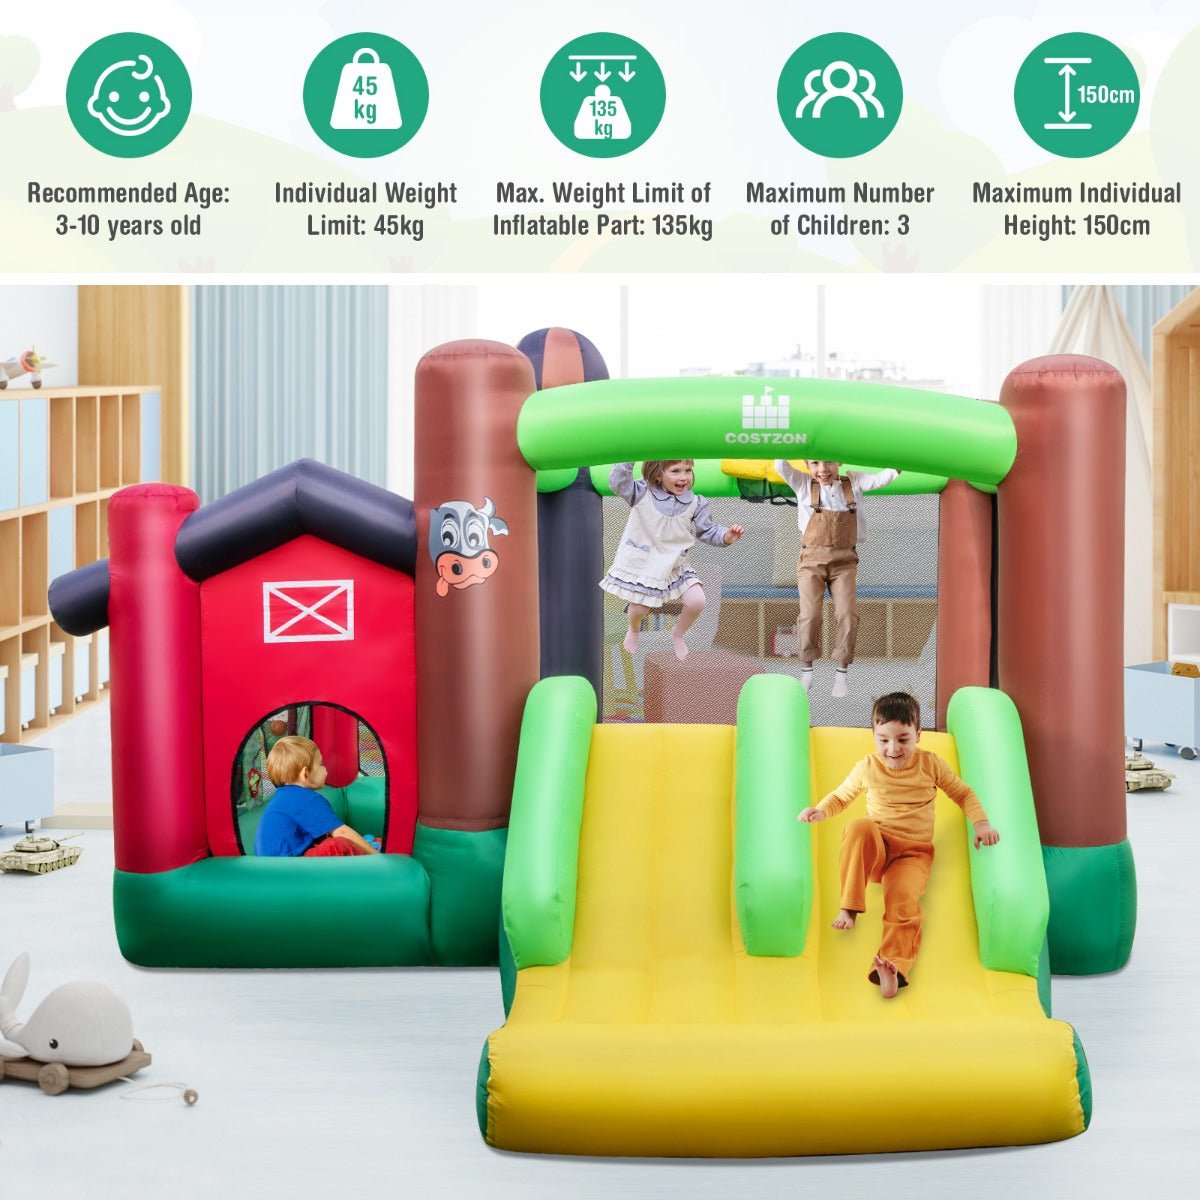 Kids Inflatable Bounce Castle - Two Slides for Endless Outdoor Adventure (Blower Included)